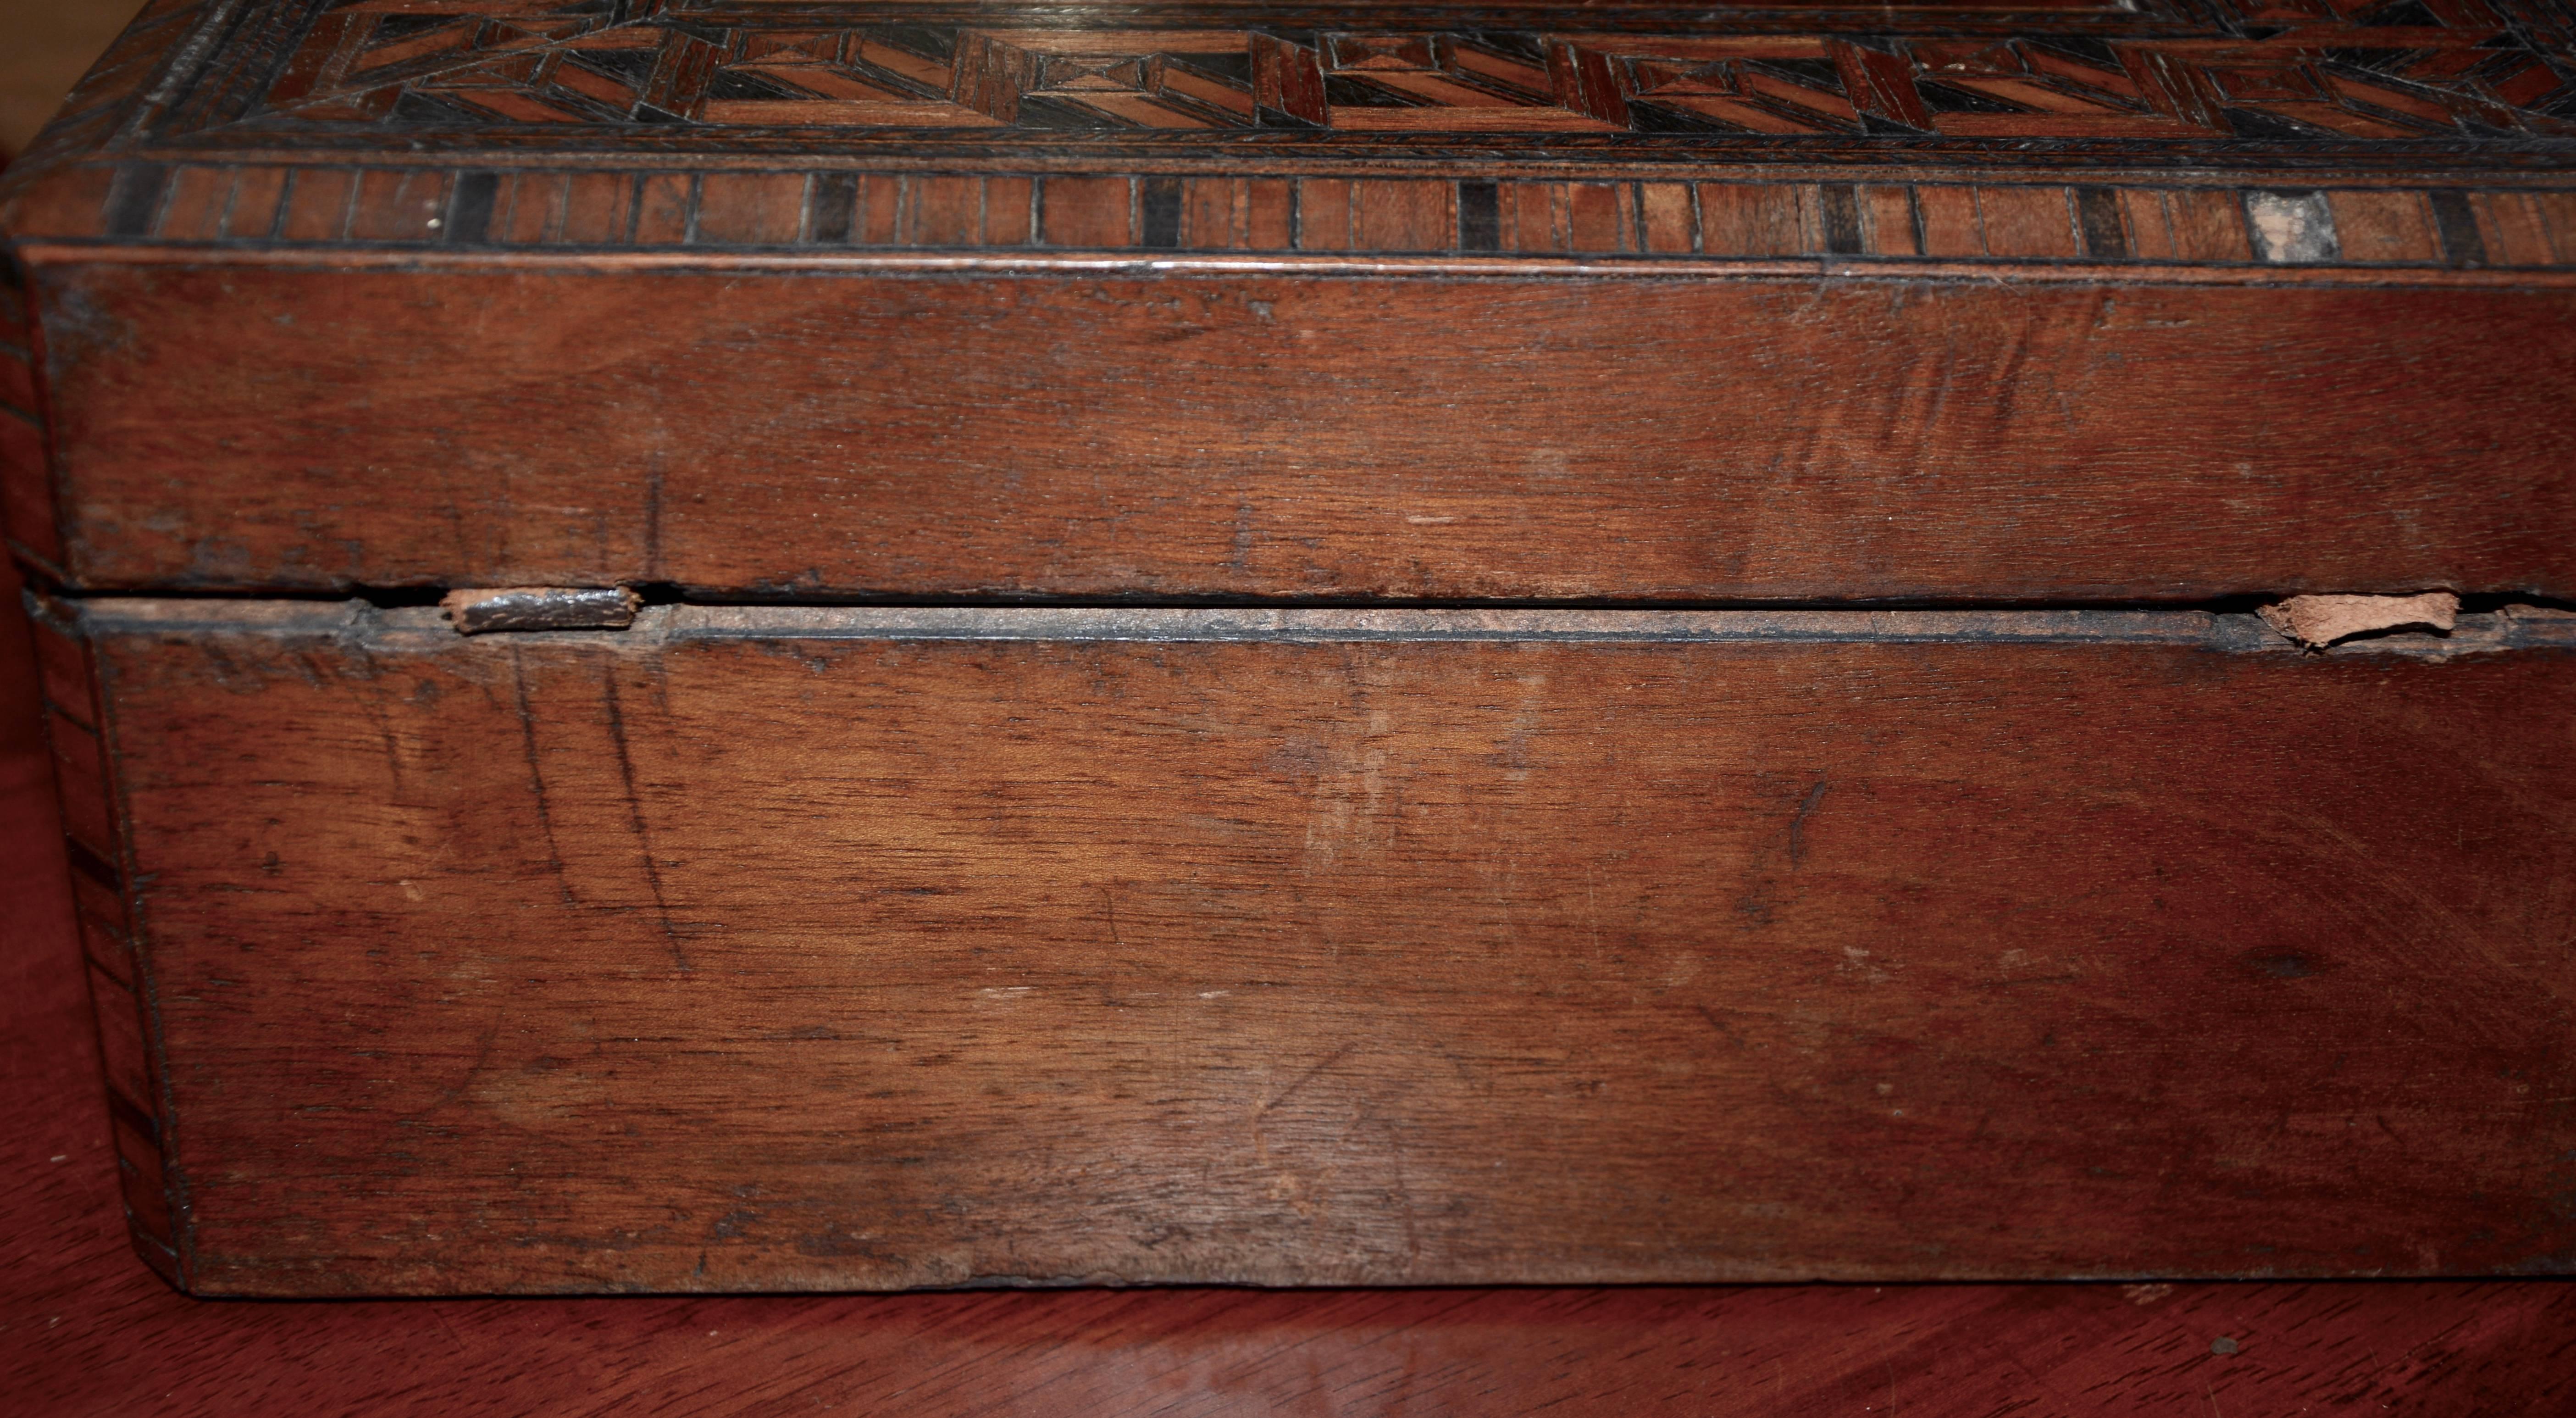 Walnut and Cedar Wooden Inlay Box with Leather Hinges, 20th Century In Fair Condition For Sale In Cookeville, TN